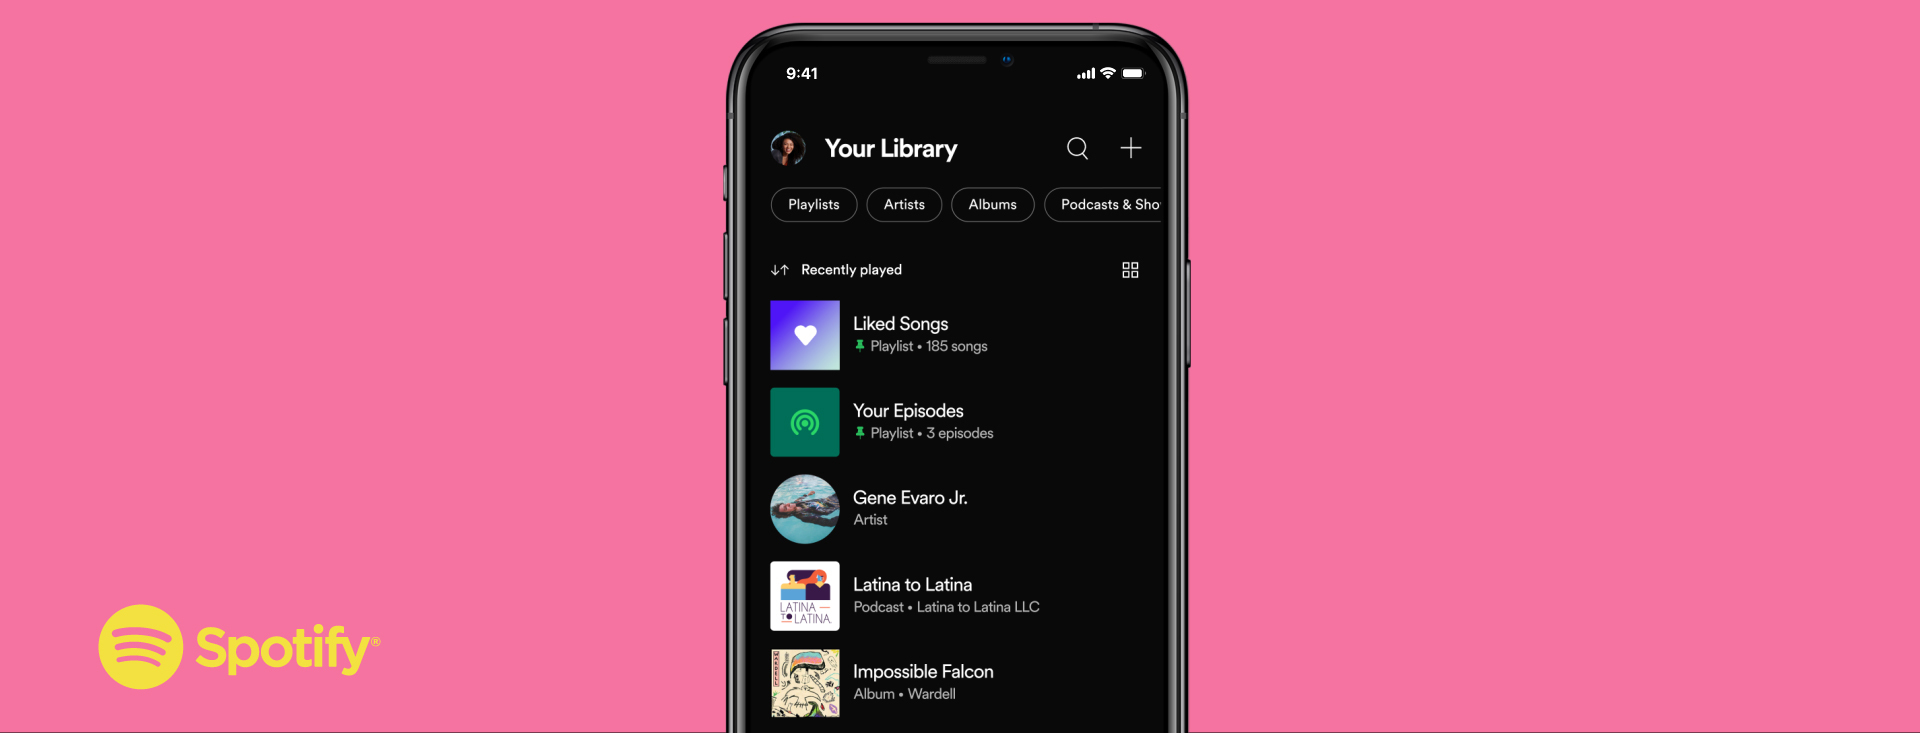 Spotify update ‘Your Library’ with a new layout and features